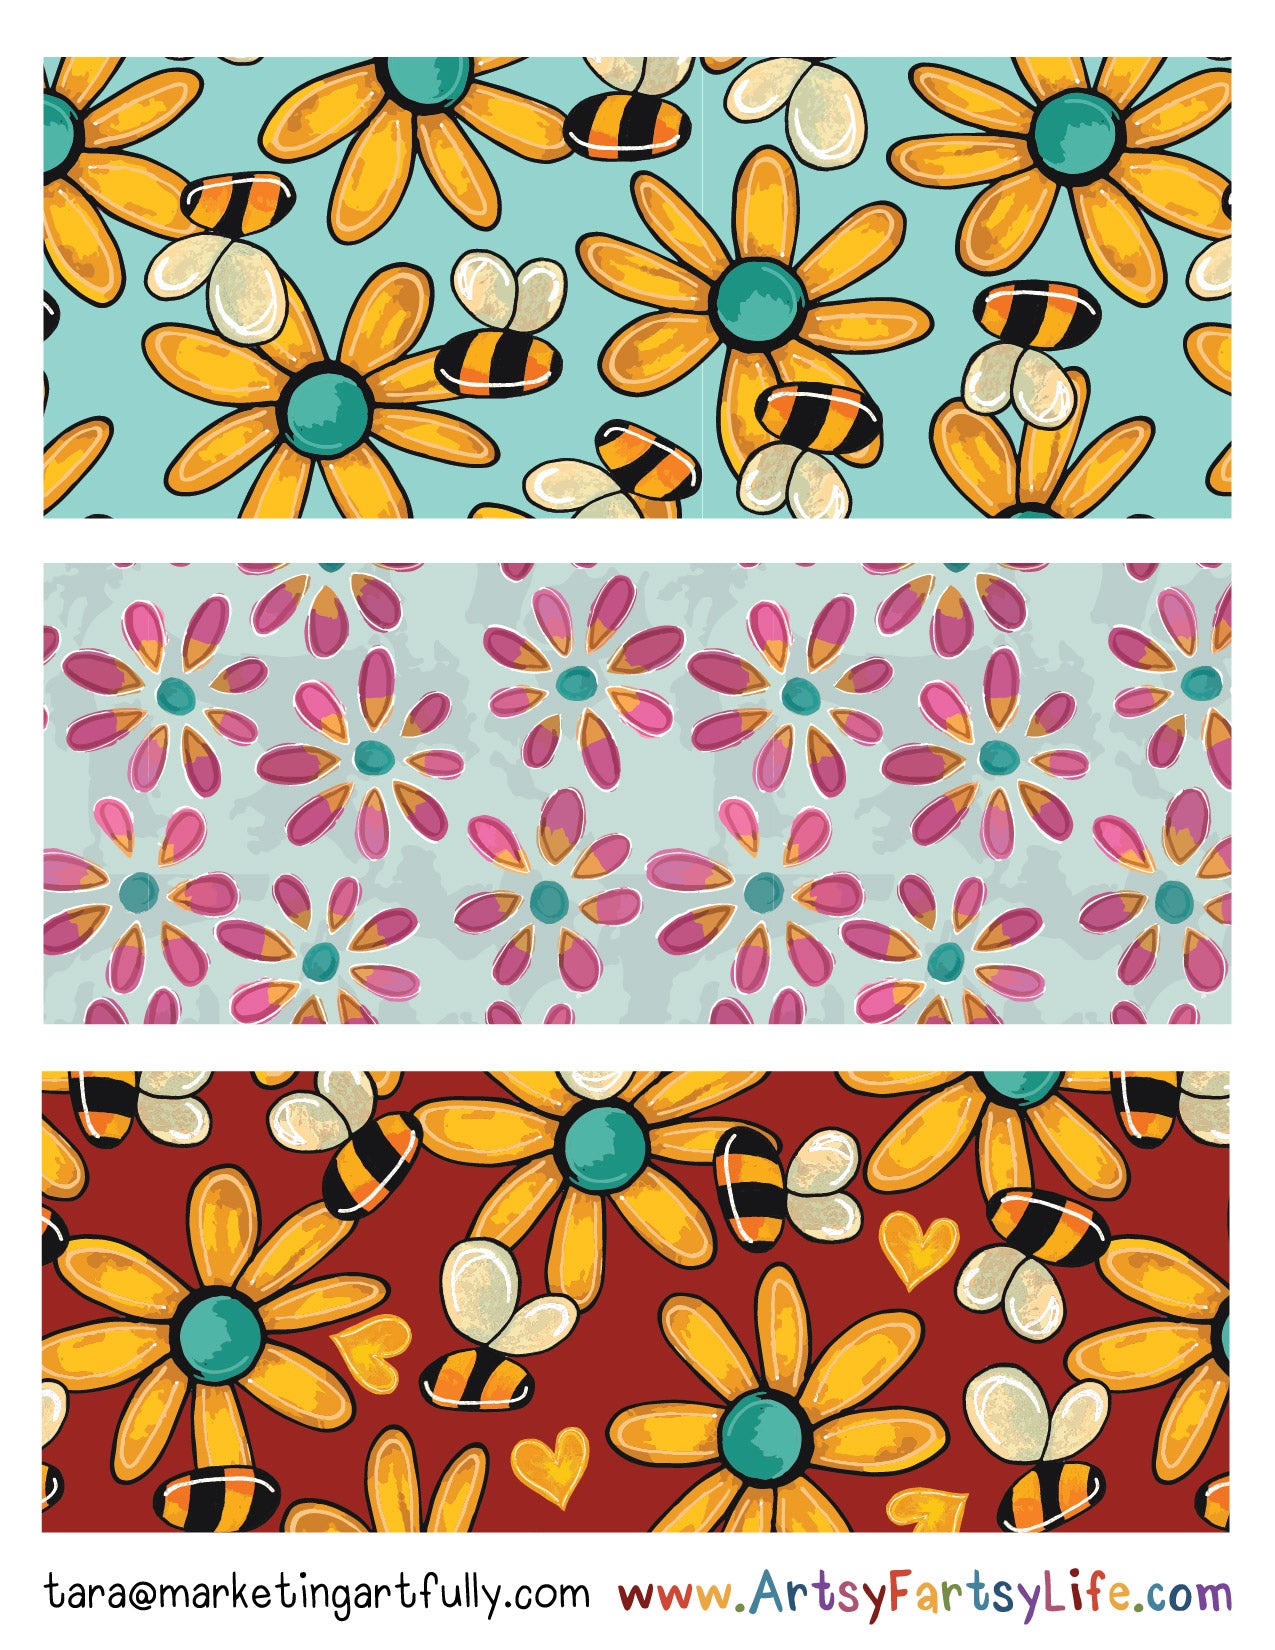 Lady Bee Bear Surface Design for Craft Supplies